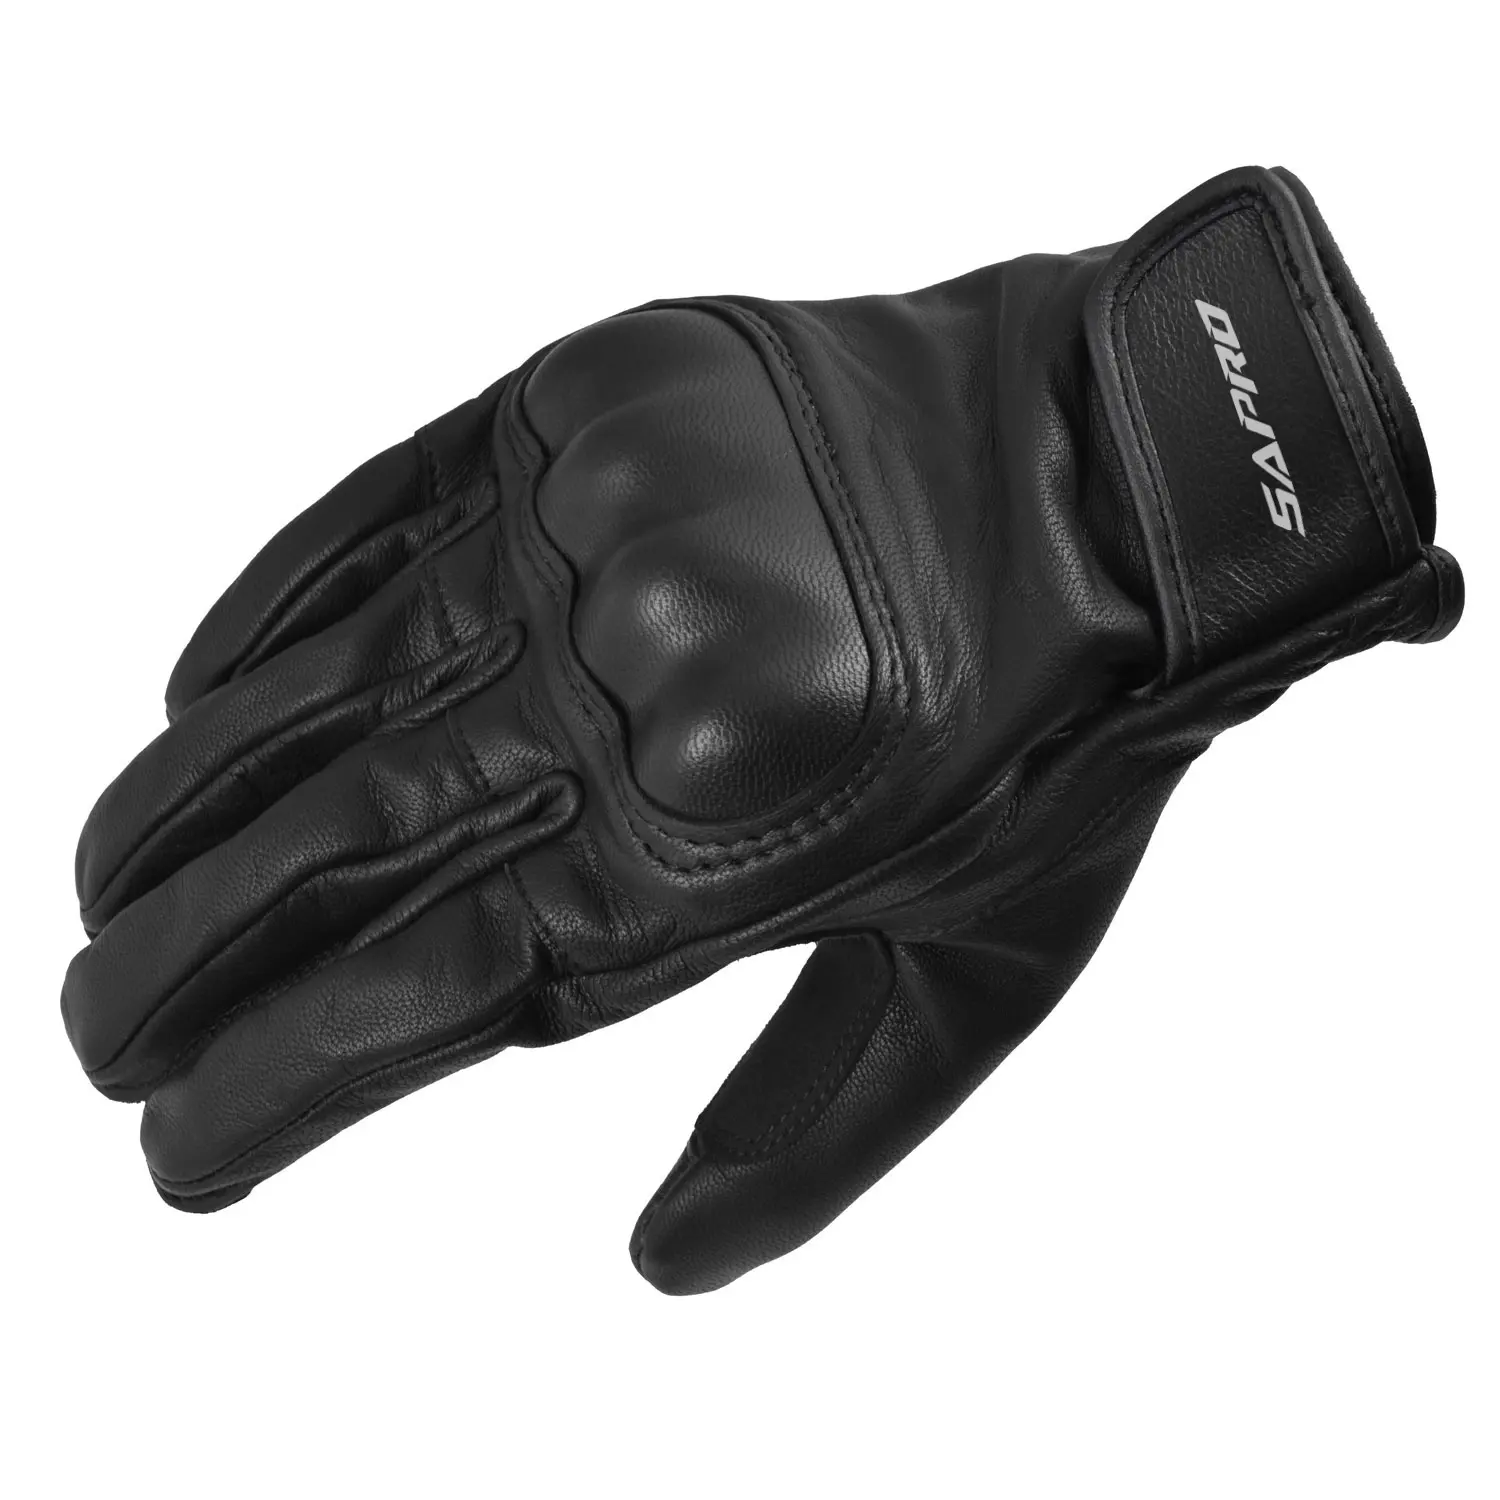 COMBATIVE Motorcycle Racing Short Glove Made of High quality cowhide, goat leather & Foam Mesh with carbon knuckle safety